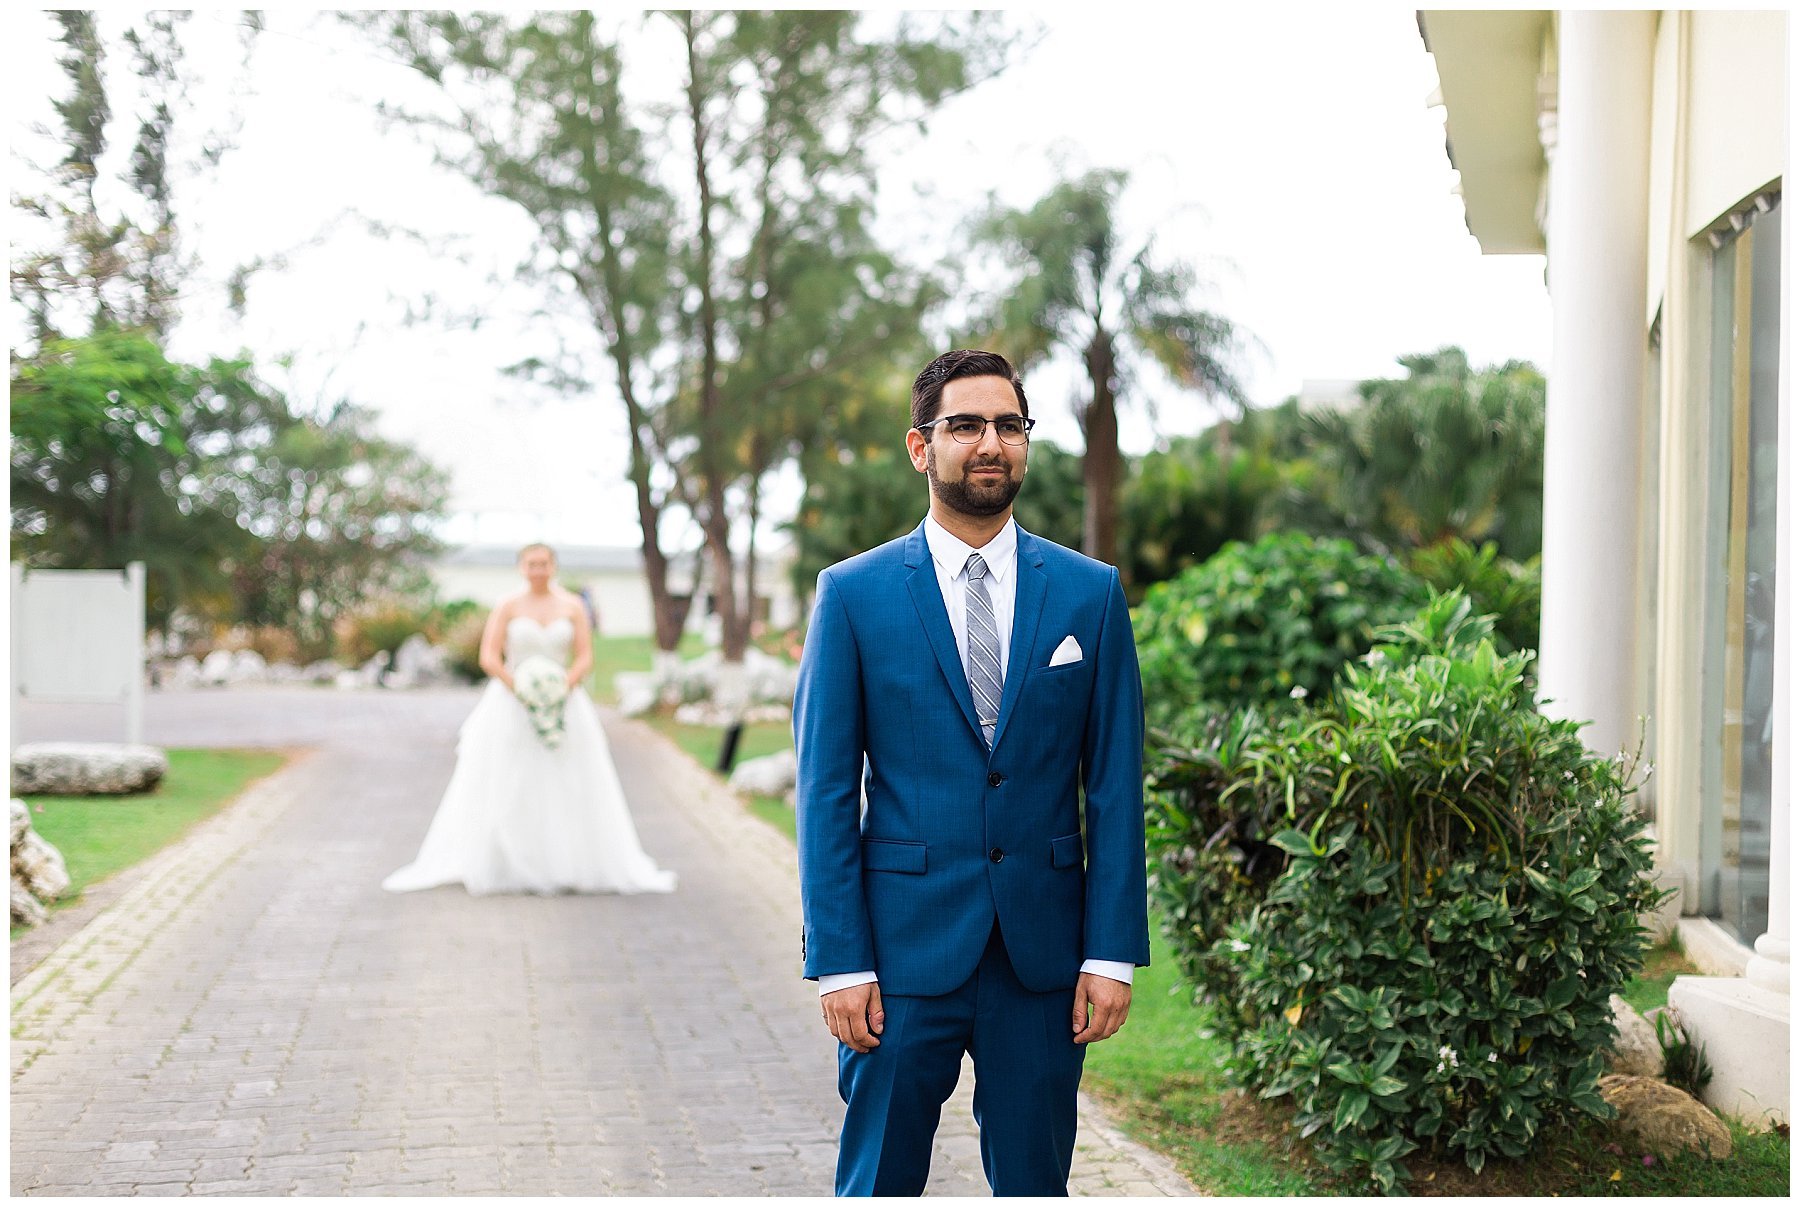 Bride and groom's first look at resort wedding in Montego Bay